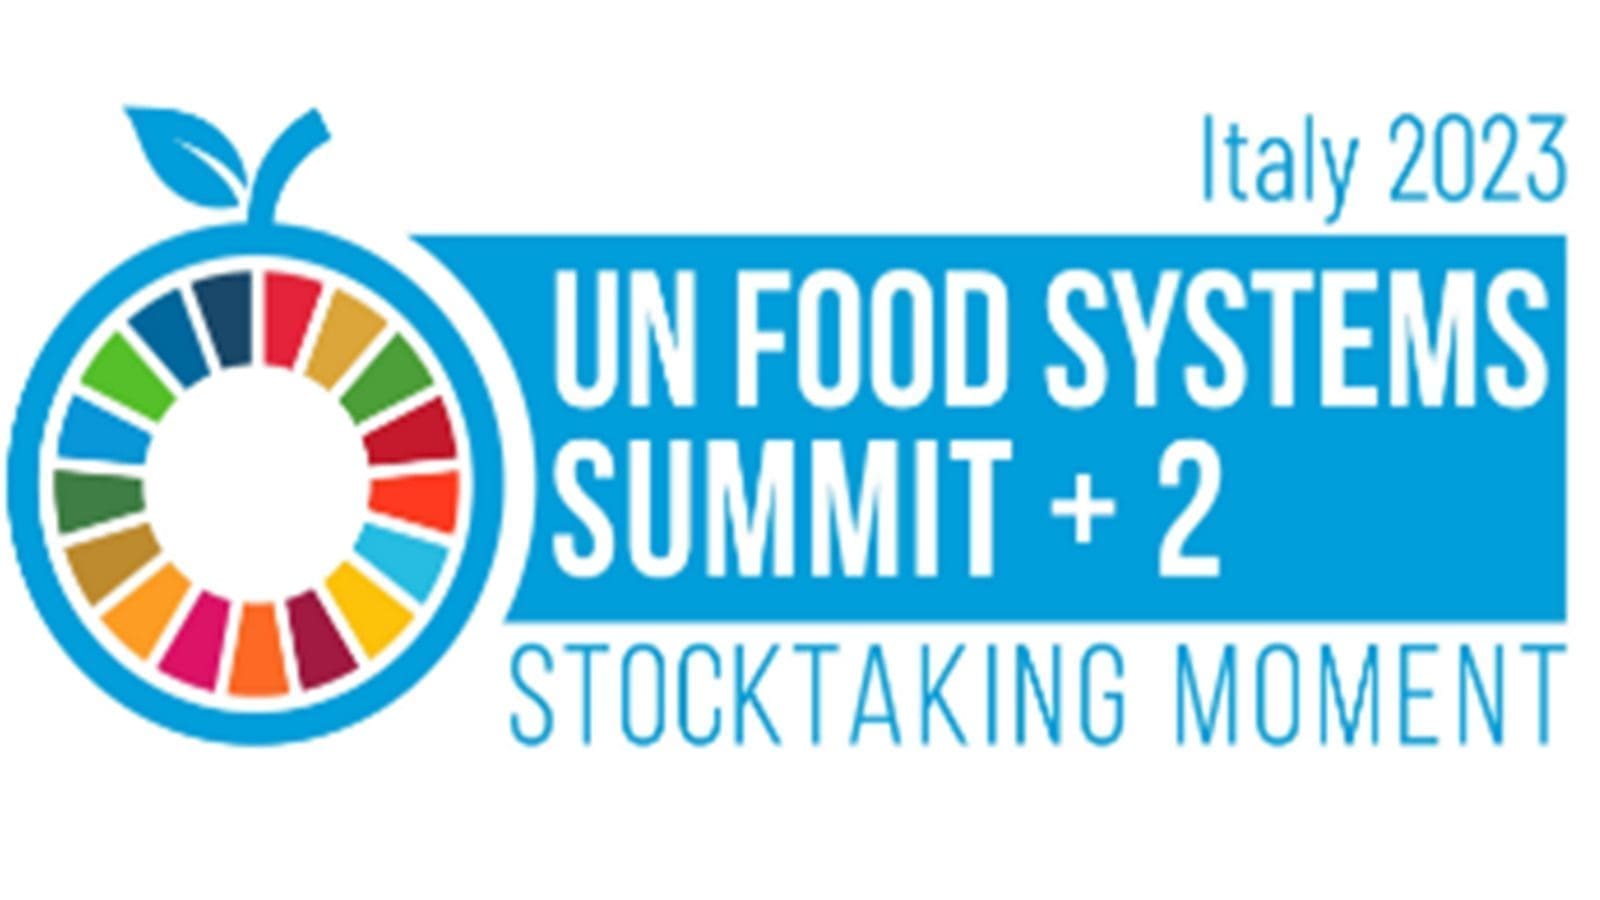 UNFSS+2 Summit to unite nations in addressing food system challenges